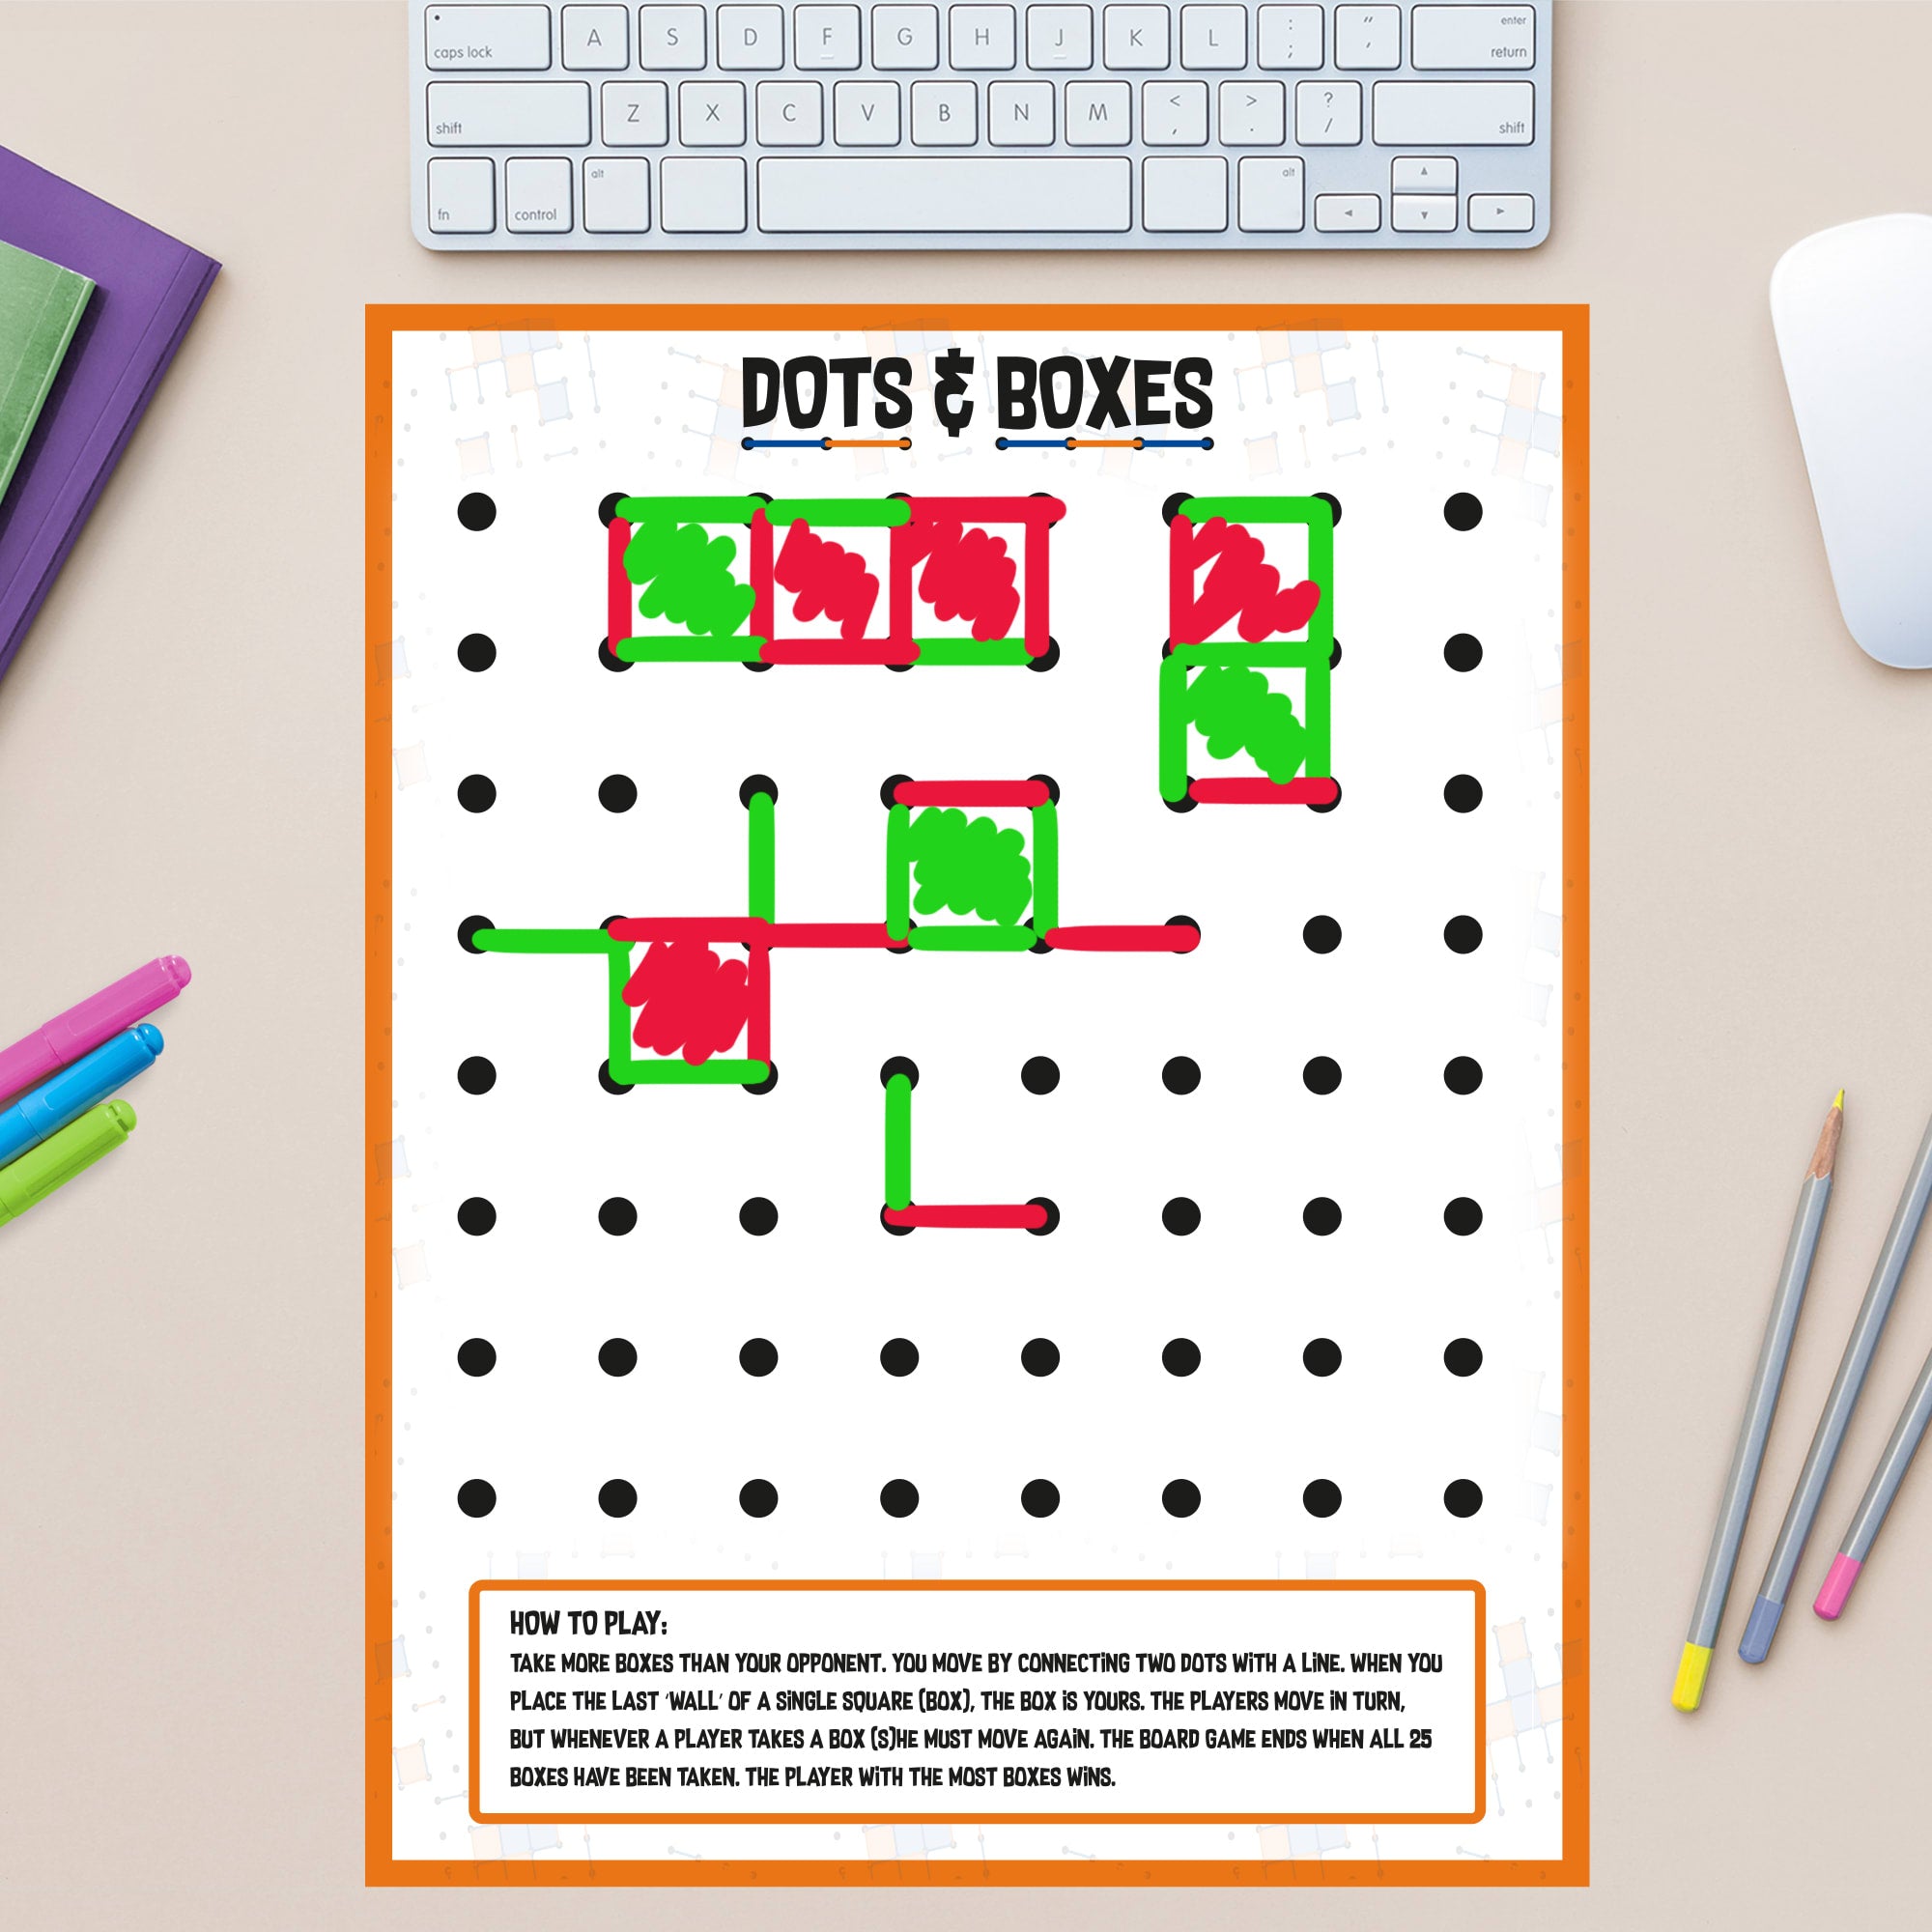 Dots & Boxes - Removable Dry Erase Vinyl Decal 11.5"W x 11.5"H by Fathead